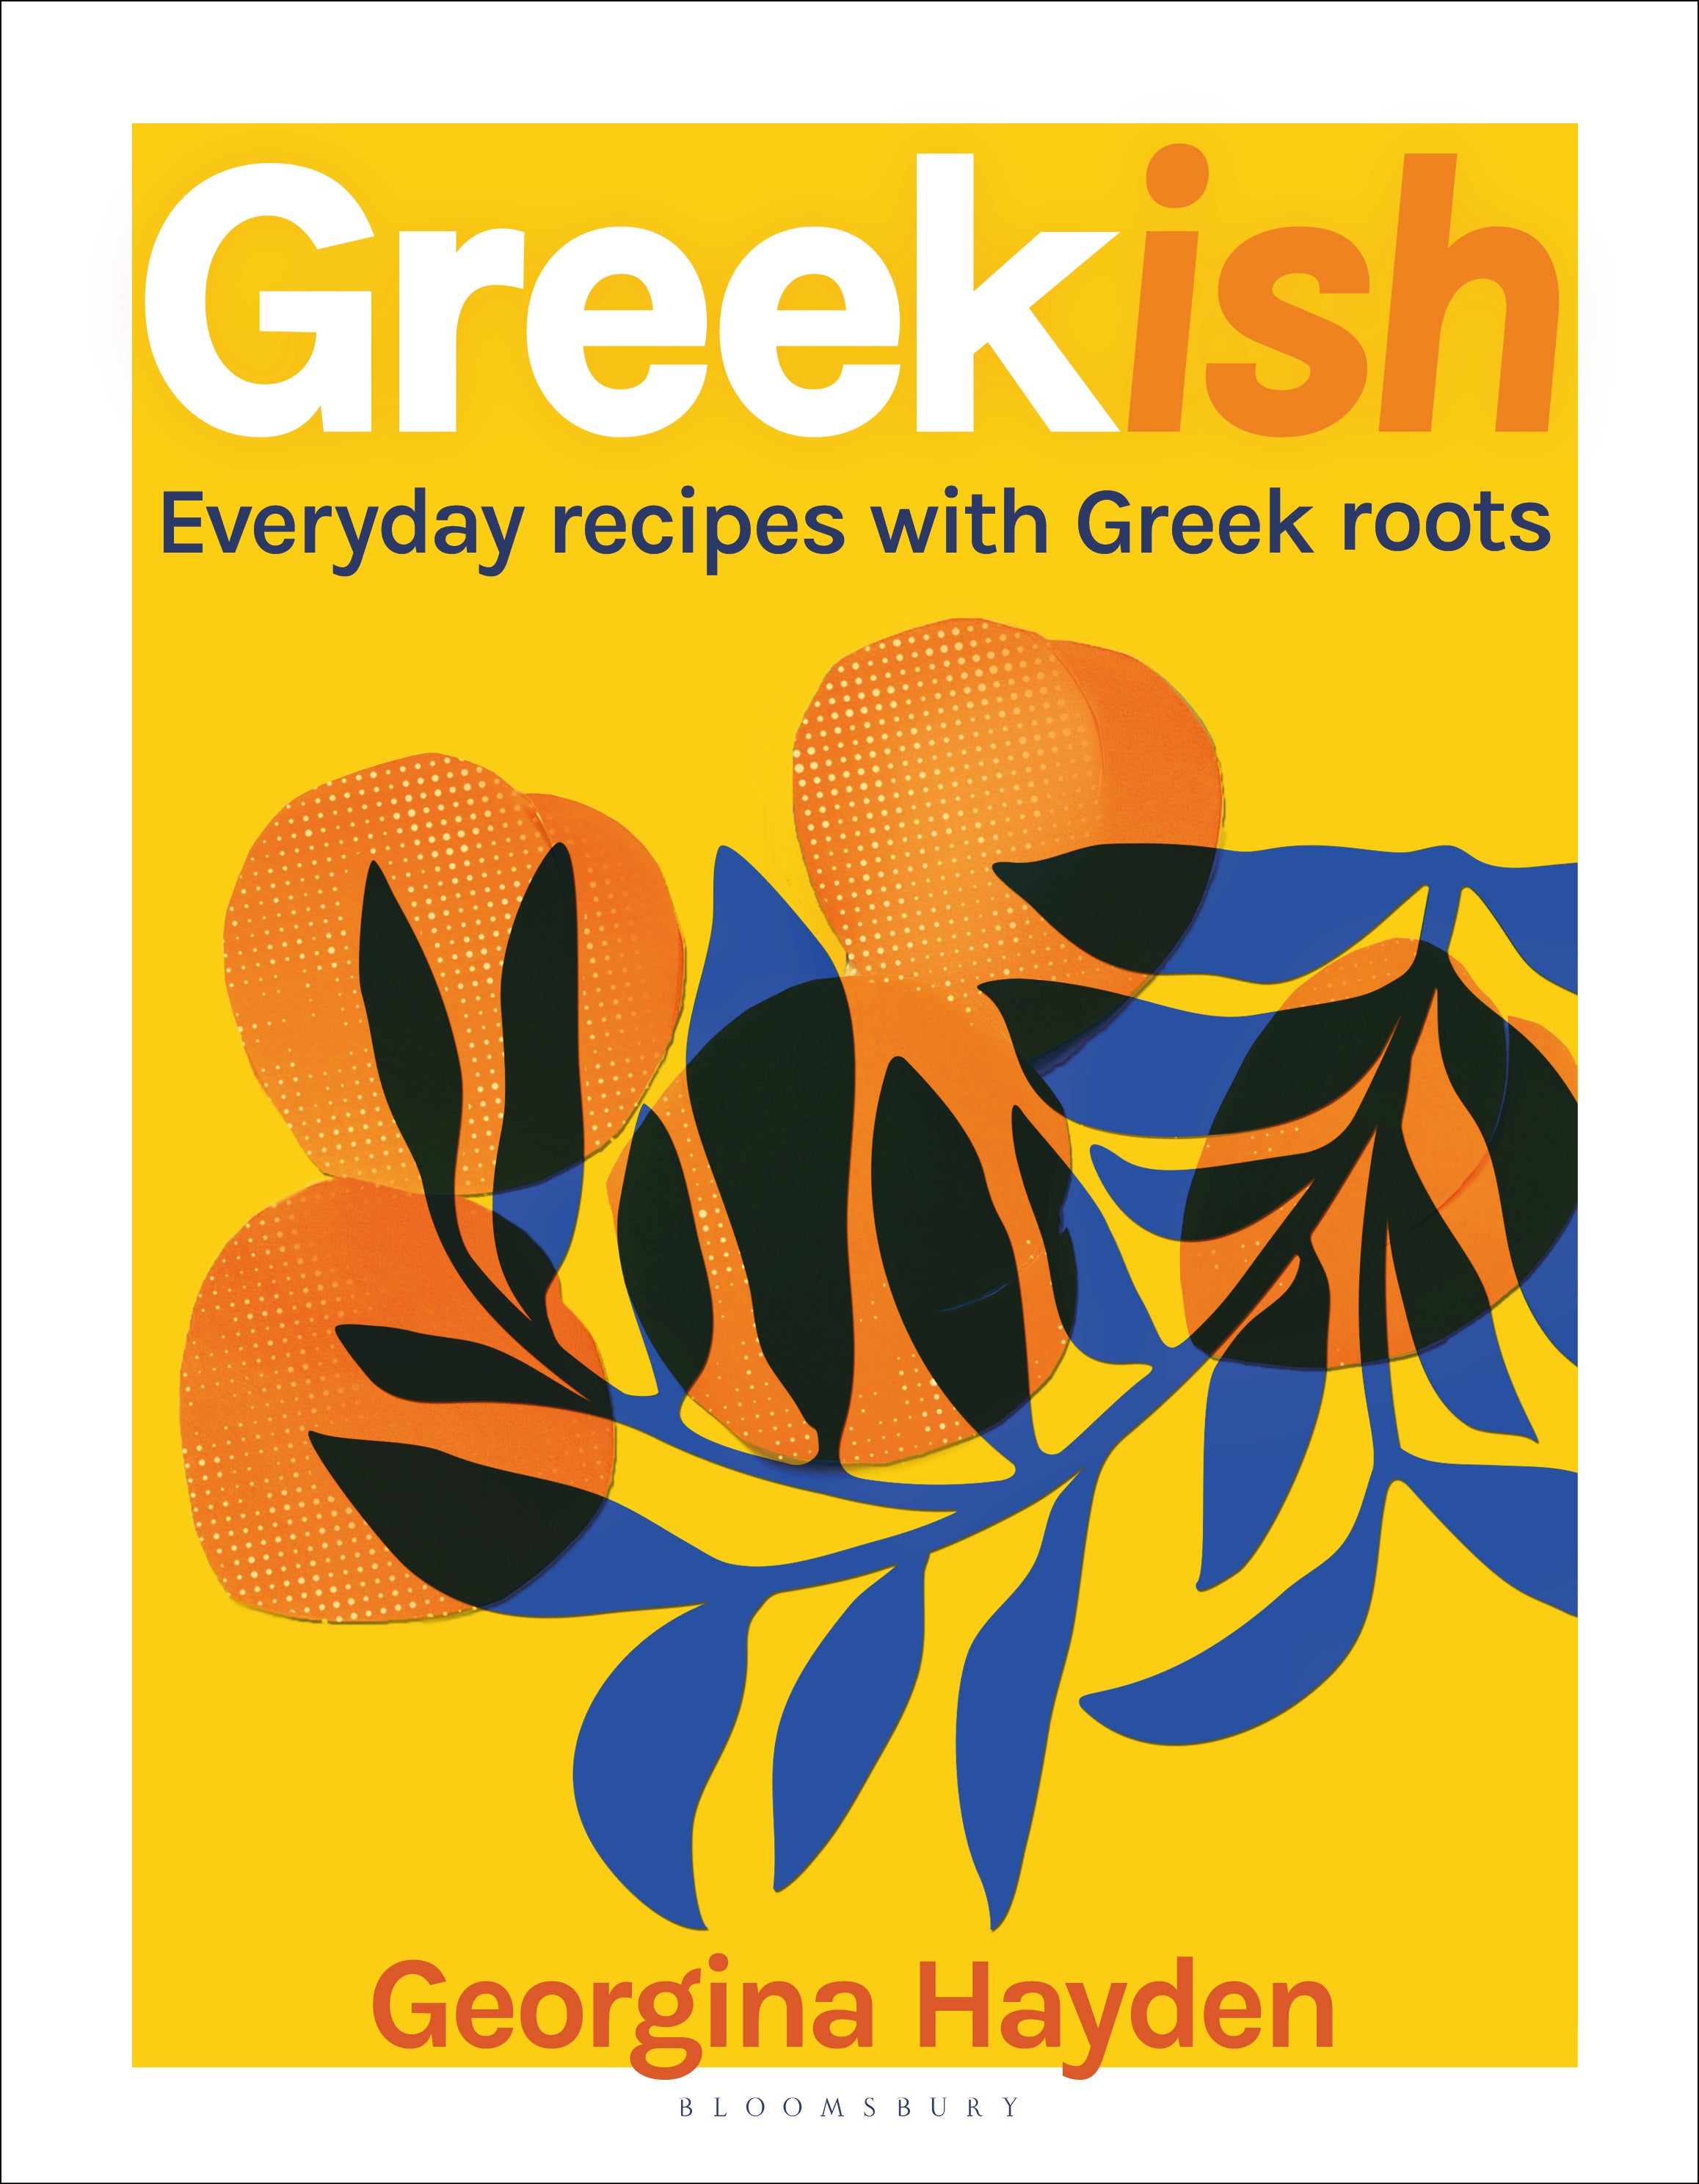 move over italian and french food – greek cuisine is having a moment